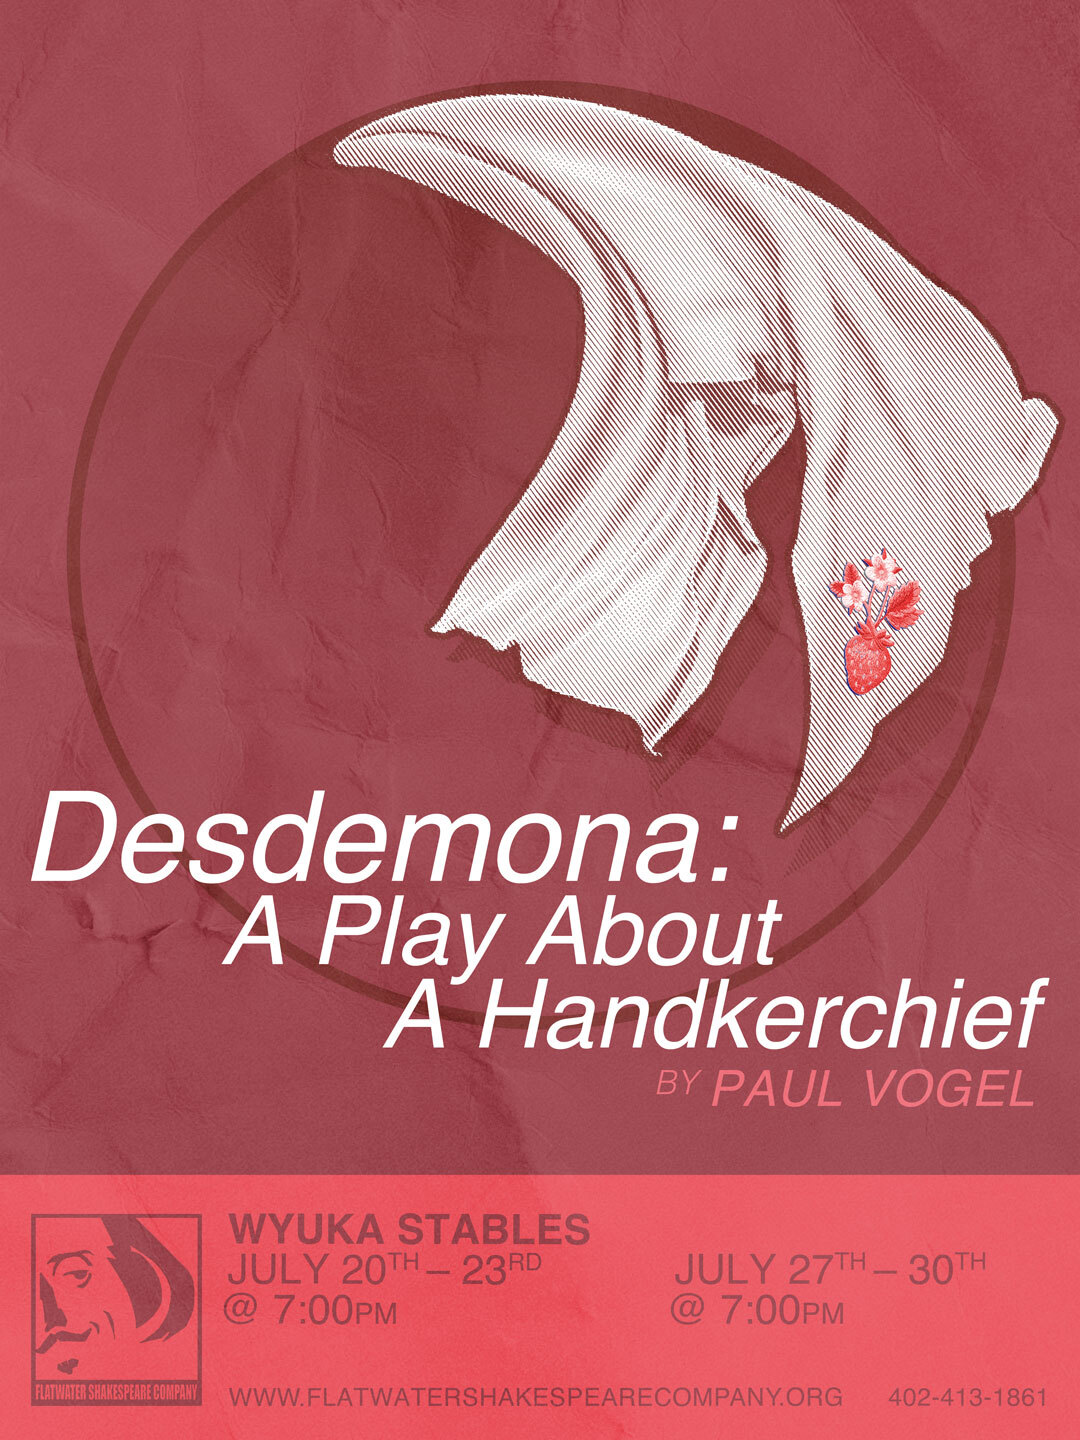 7/28 STU - STUDENT: Friday. July 28, 2023 | 7:00 p.m. - 10:00 p.m. CST | Wyuka Stables (Desdemona: A Play about a Handkerchief)